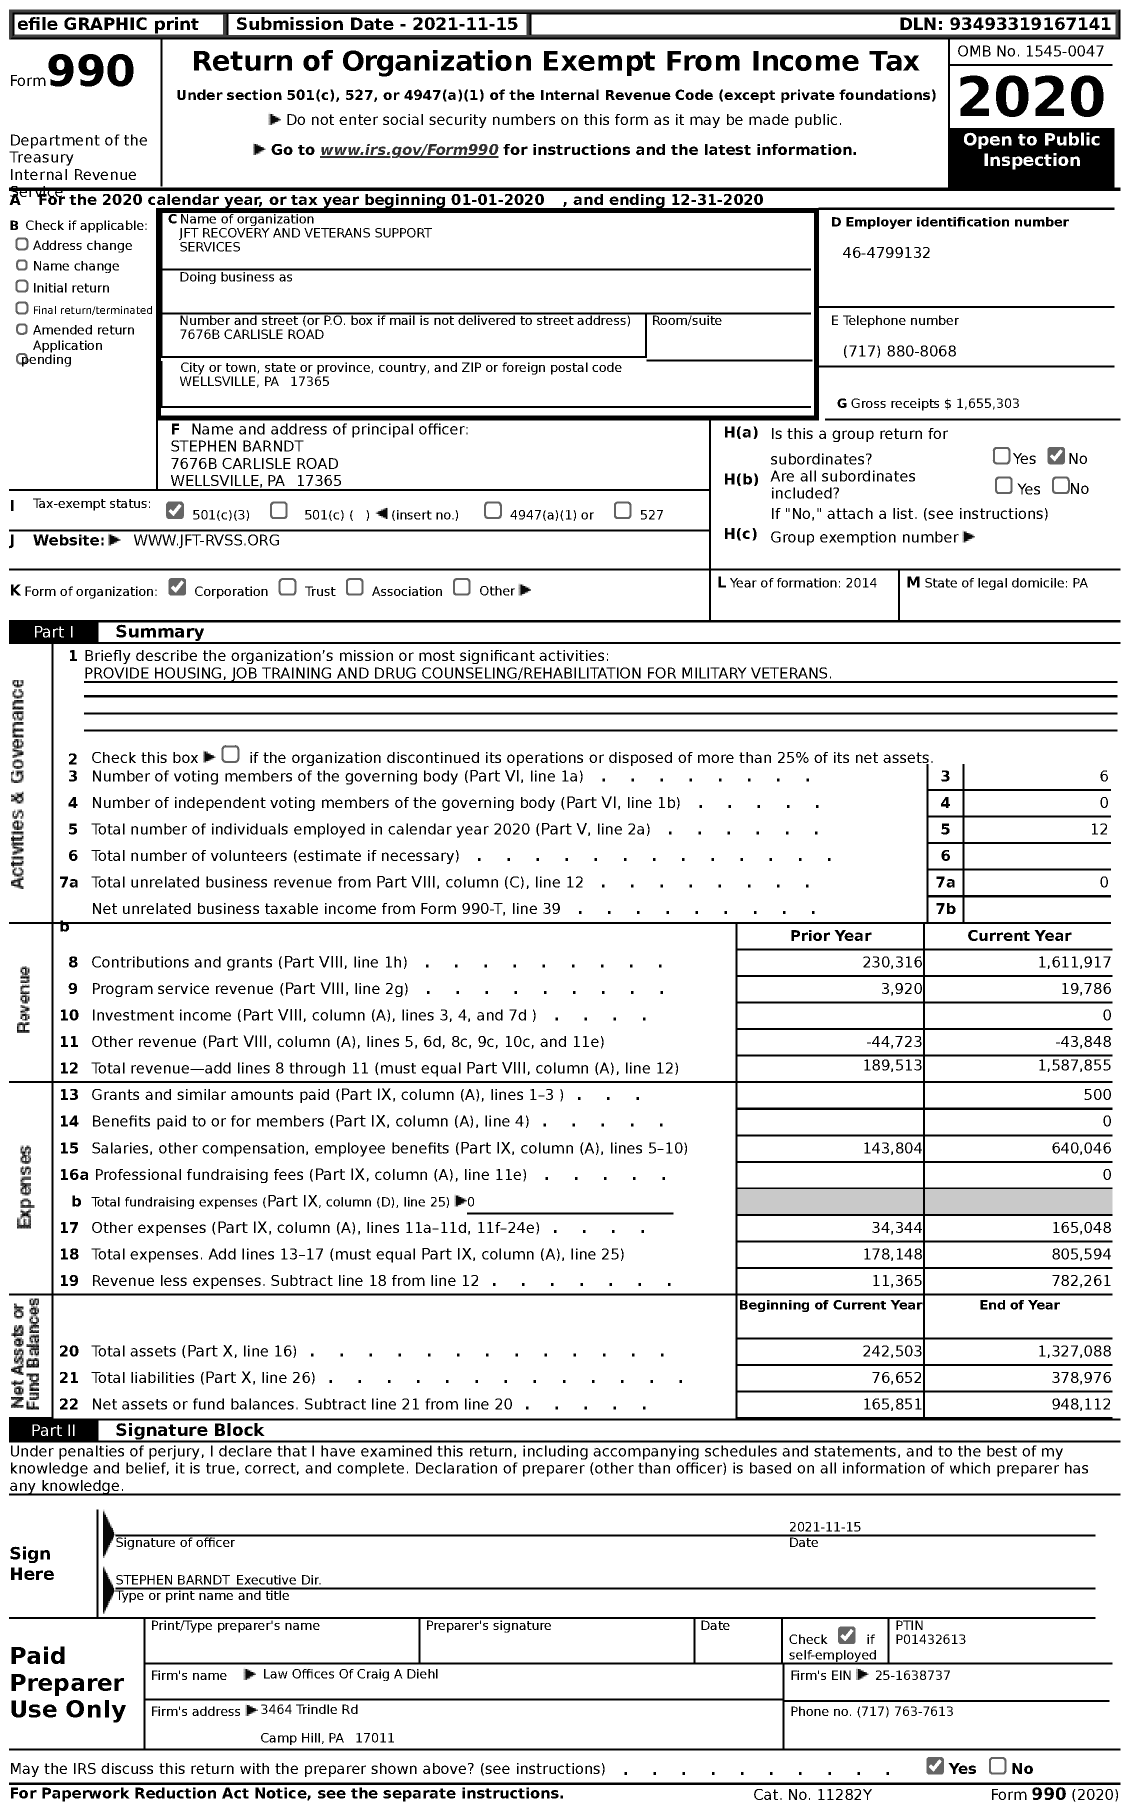 Image of first page of 2020 Form 990 for JFT Recovery and Veterans Support Services